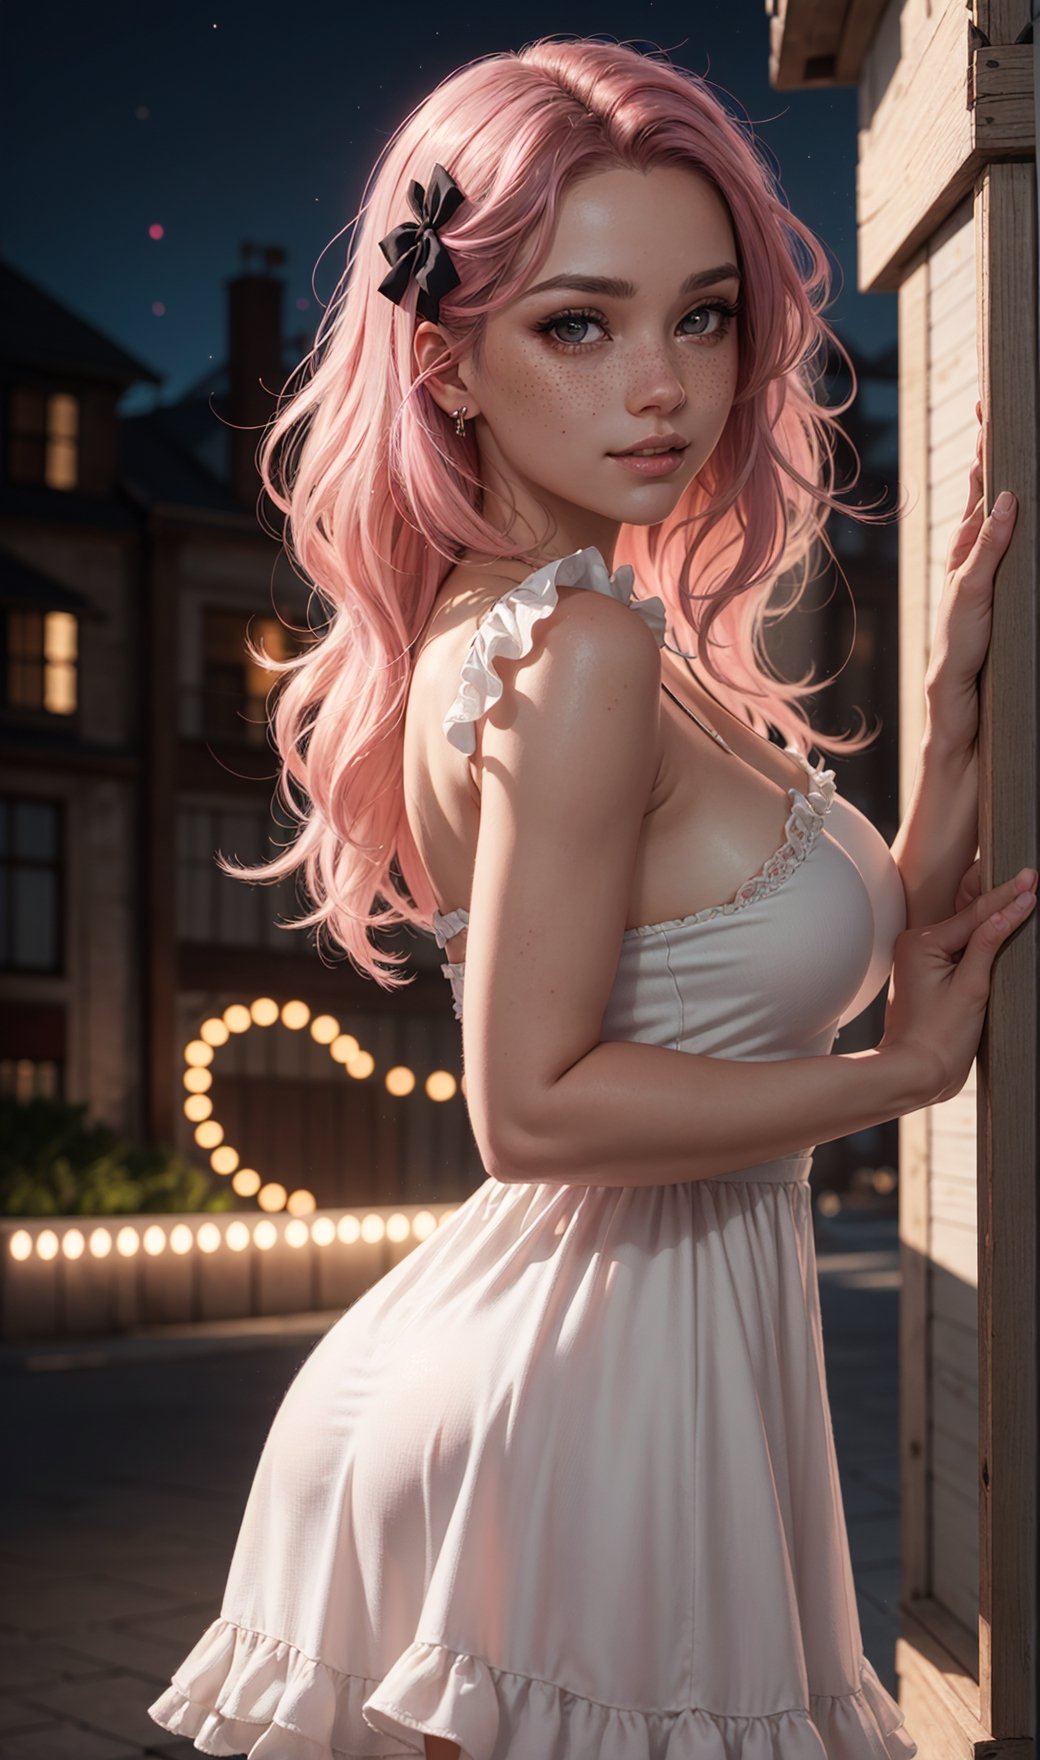 red green black eyes, rutkowski repin, wlop, natural pink hair realistic , image, bokeh, night, of an incredibly beautiful happy, woman anime style , large pefect eyes Jean-Baptiste Monge style, with highlights in her eyes, light freckles pink and white frilly dress and plaited hair with ribbons stanley artgerm lau style, wlop style, rossdraws style, outdoor hyper detailed , (((rich dark shadows))), Wlop, Artgem , artstation, cgsociety, 8K UHD, HDR